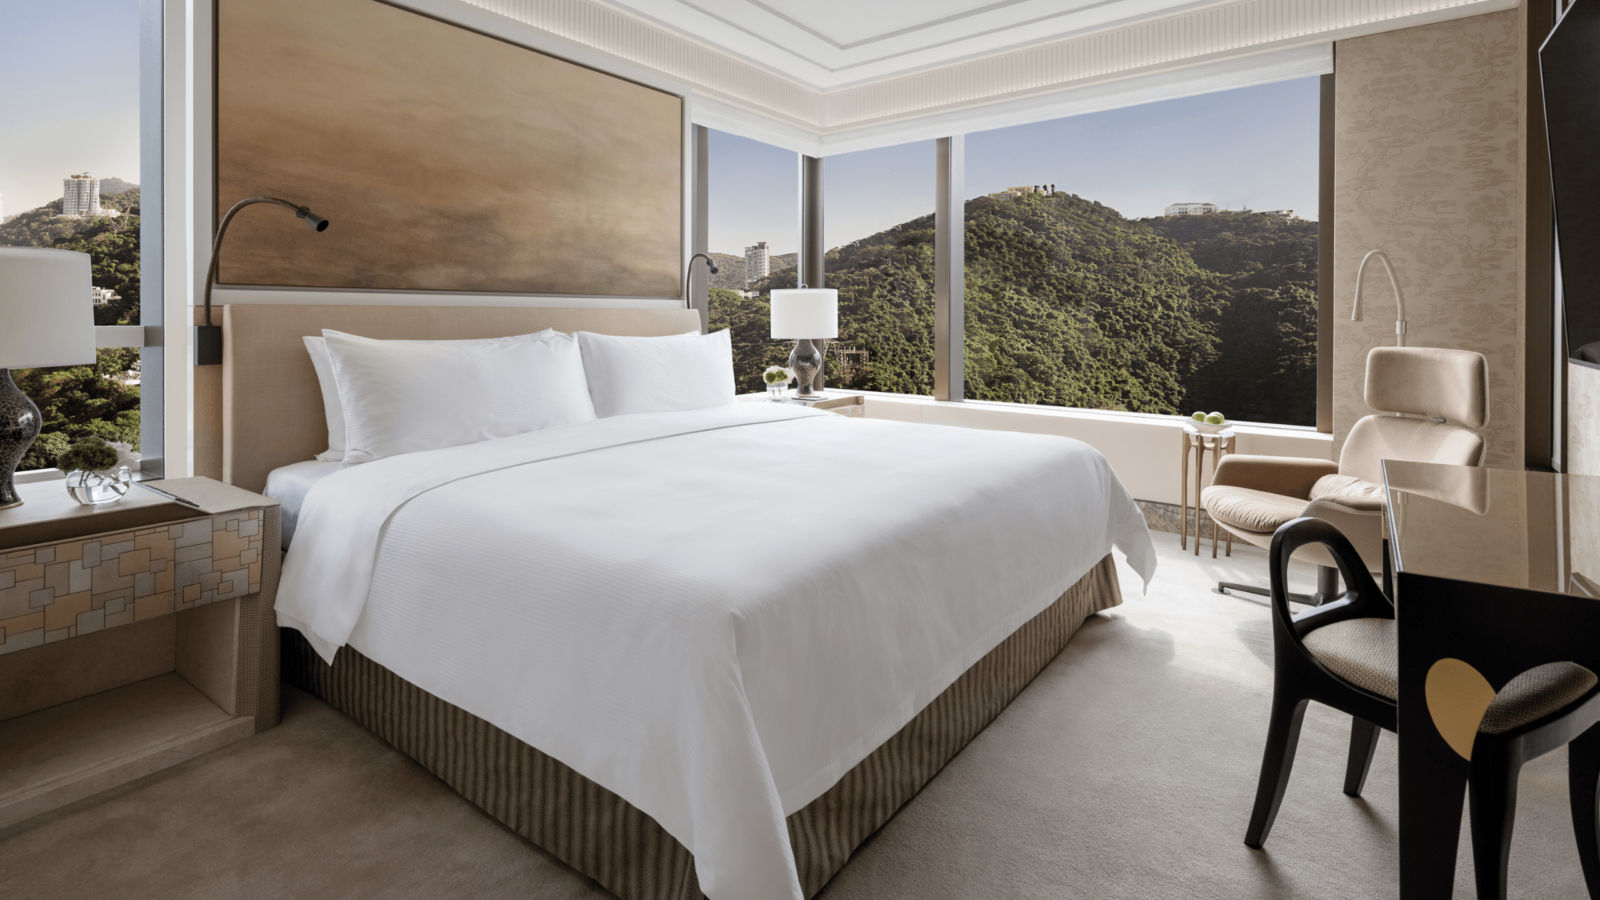 Suite Staycation: Island Shangri-La, Hong Kong unveils its brand new Horizon Club rooms